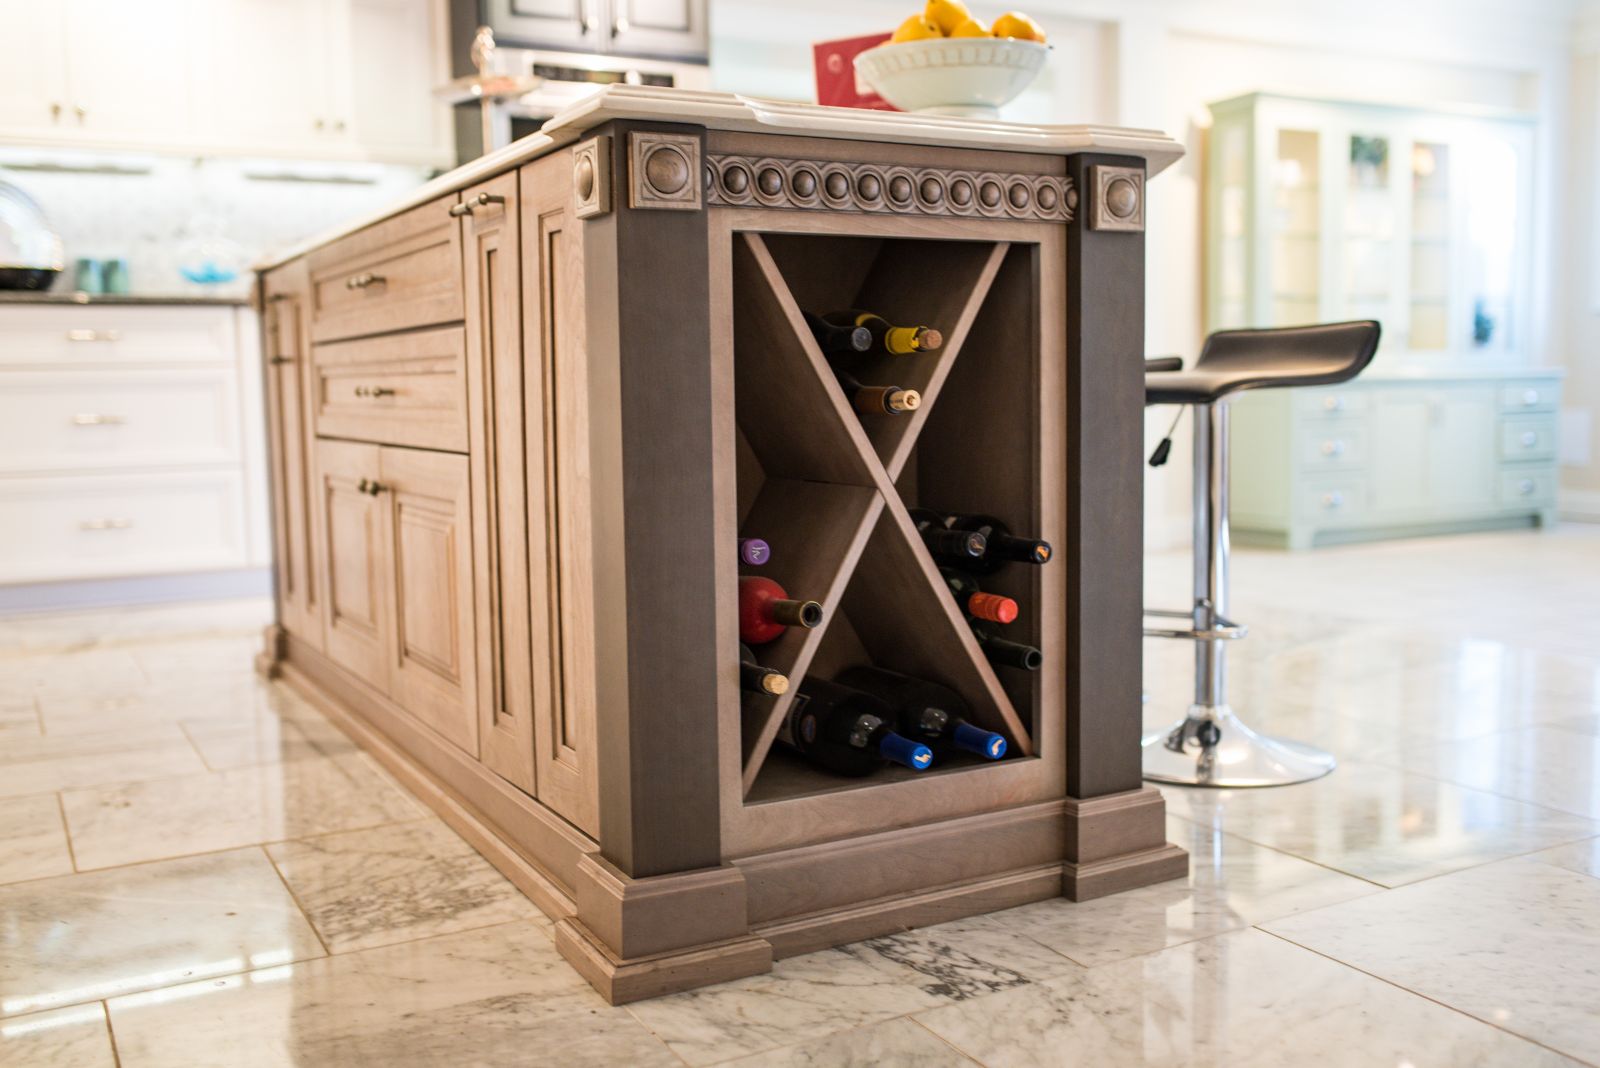 upclose view of wine rack in kitchen island